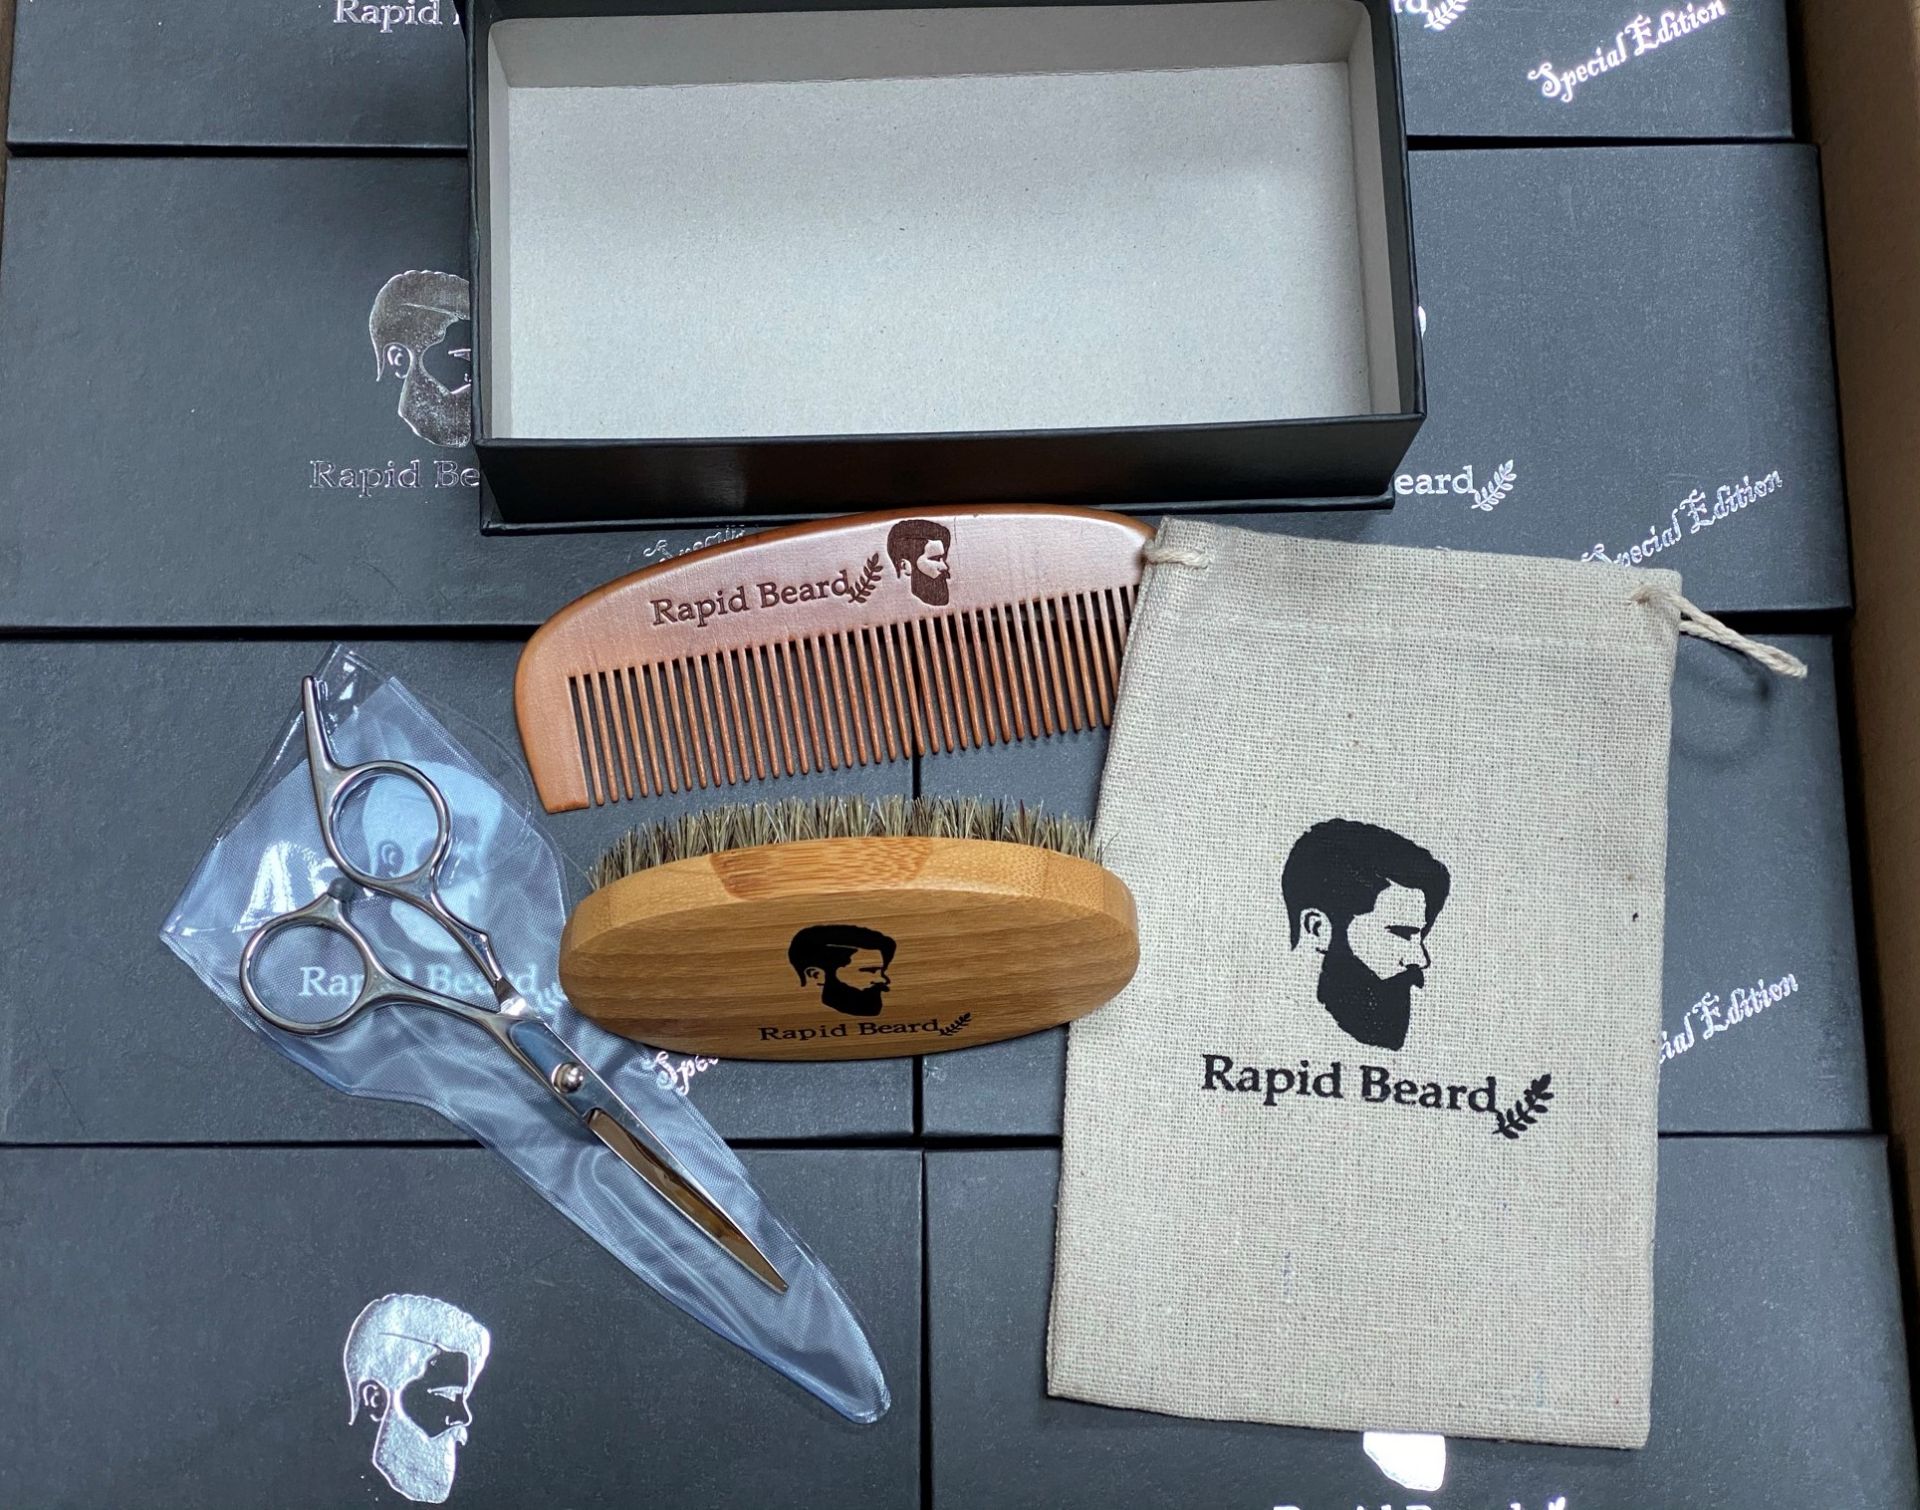 40 x Rapid Beard Special Edition box sets (1 outer box - 40 sets per box)